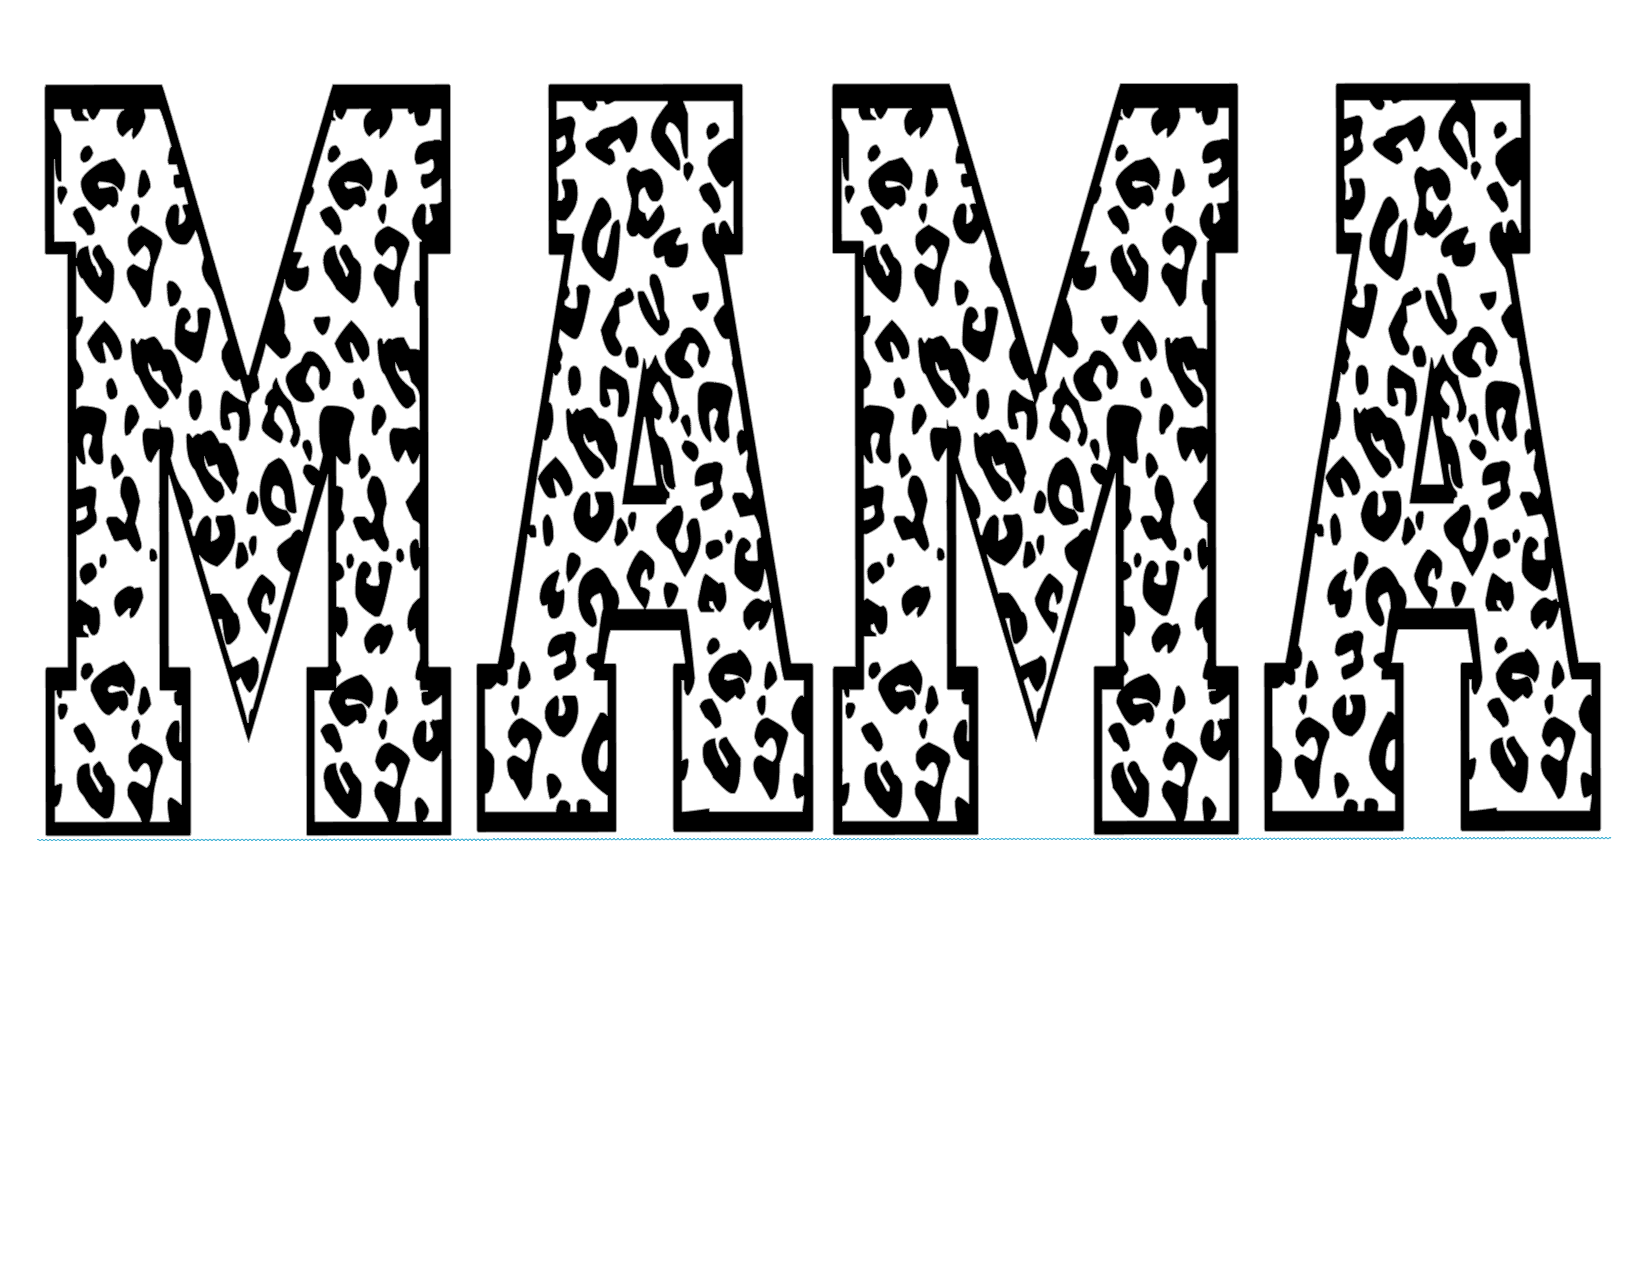 #119 MAMA Leopard(can me any name)